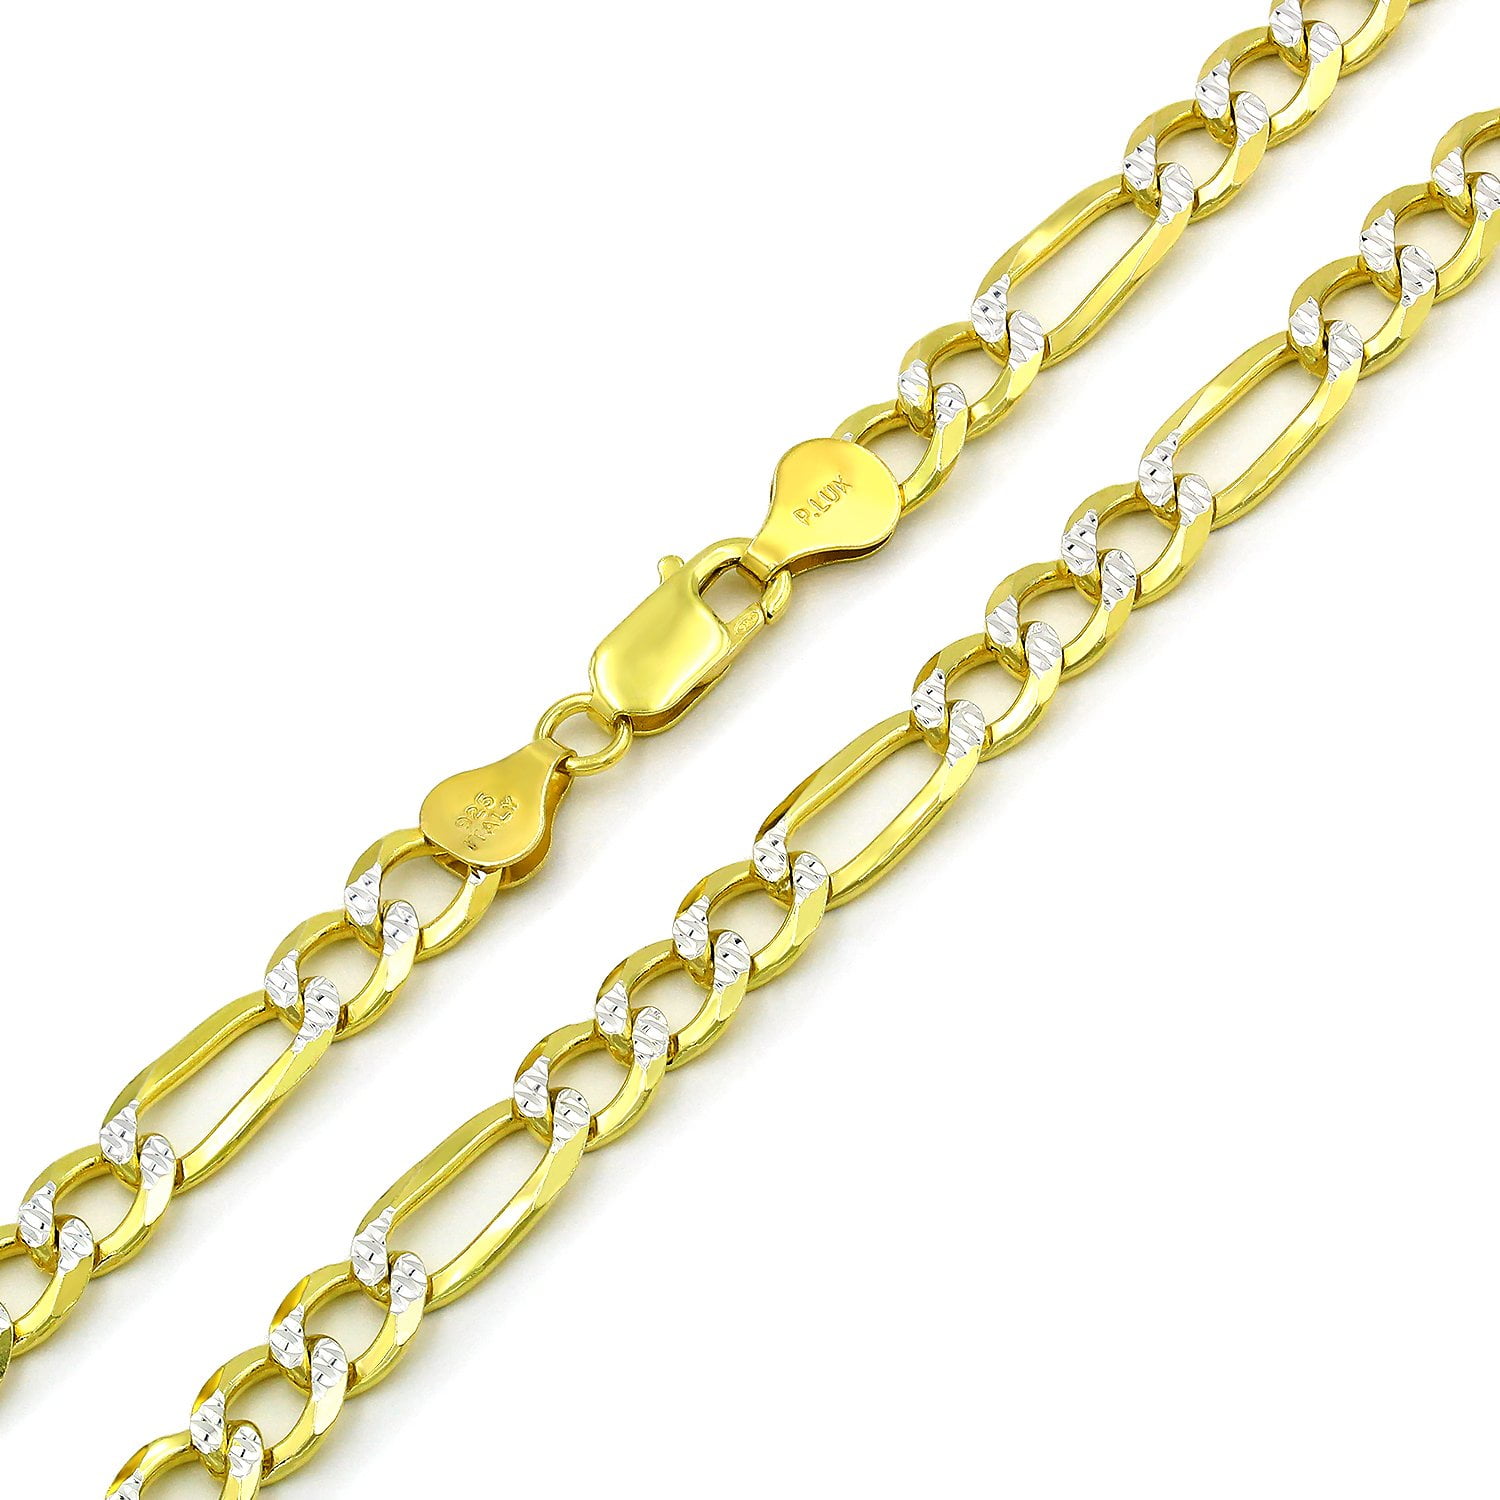 Solid 925 Sterling Silver 14K Gold Vermeil Italian Rope Chain, 2.5mm,  Diamond Cut, Necklace, Made in Italy, Gift for Him, Gift for Her - Etsy